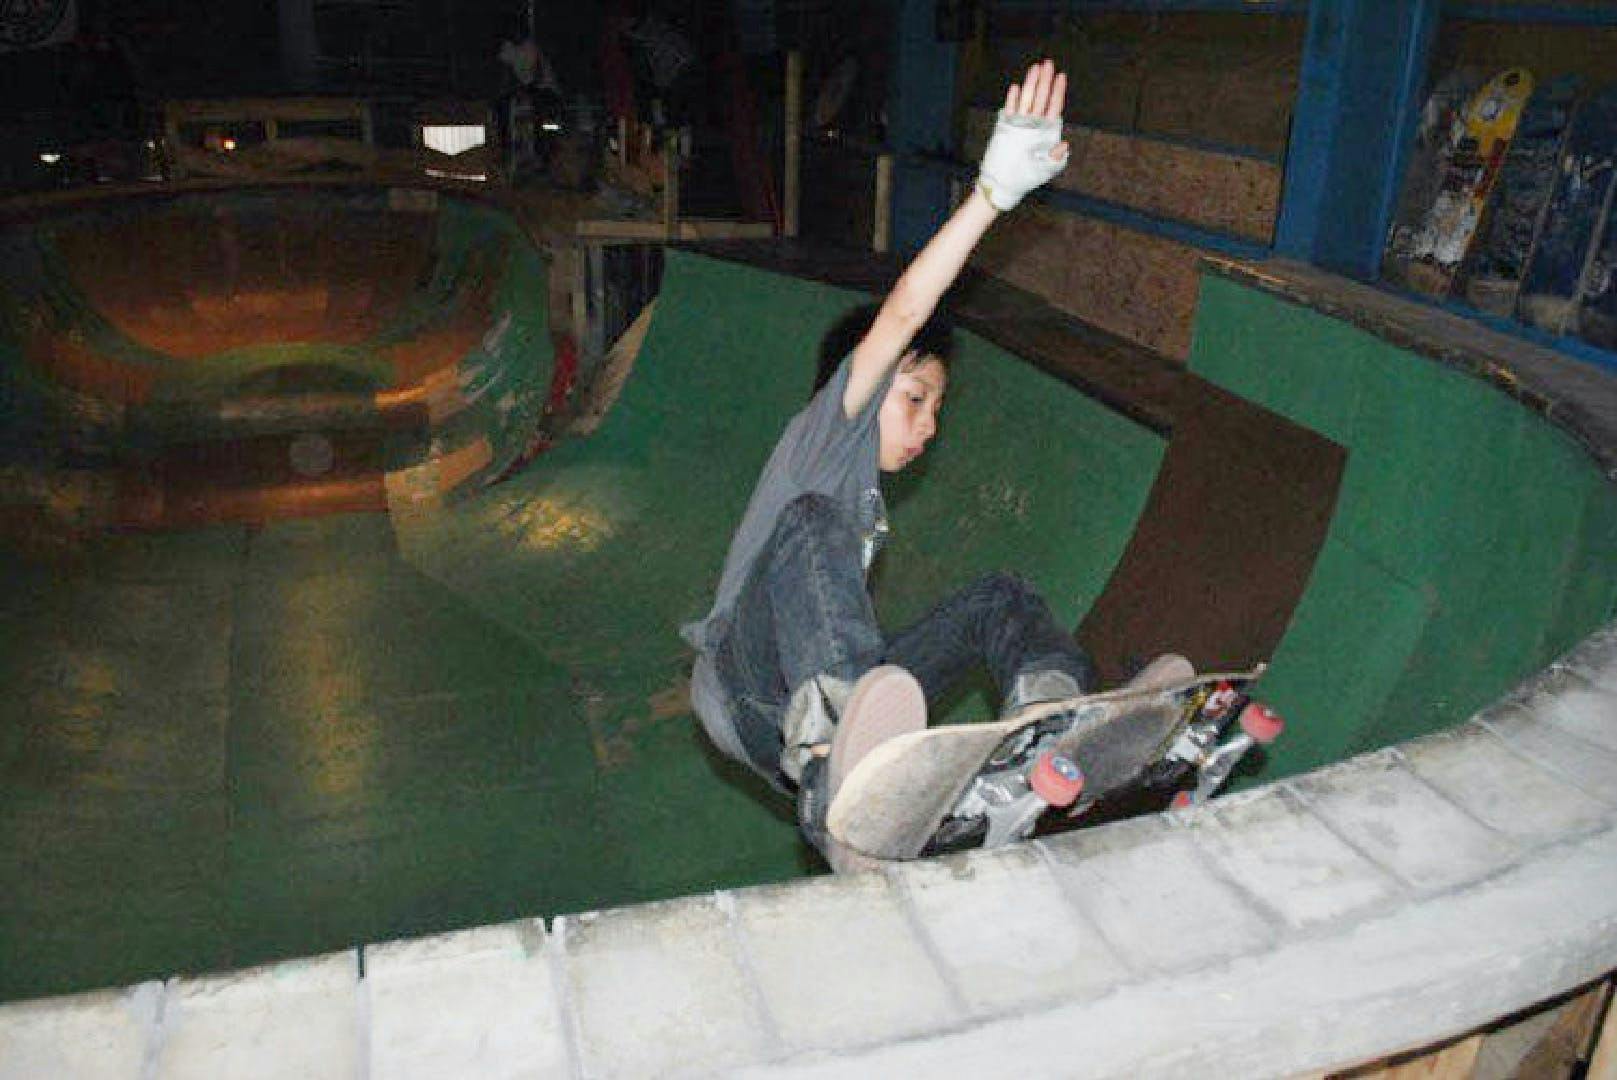 Takeshi in his childhood deciding to do a front grind in the FUZENNA bowl./ FUZENNAボウルでフロントグラインドを決める幼き日のタケシ。